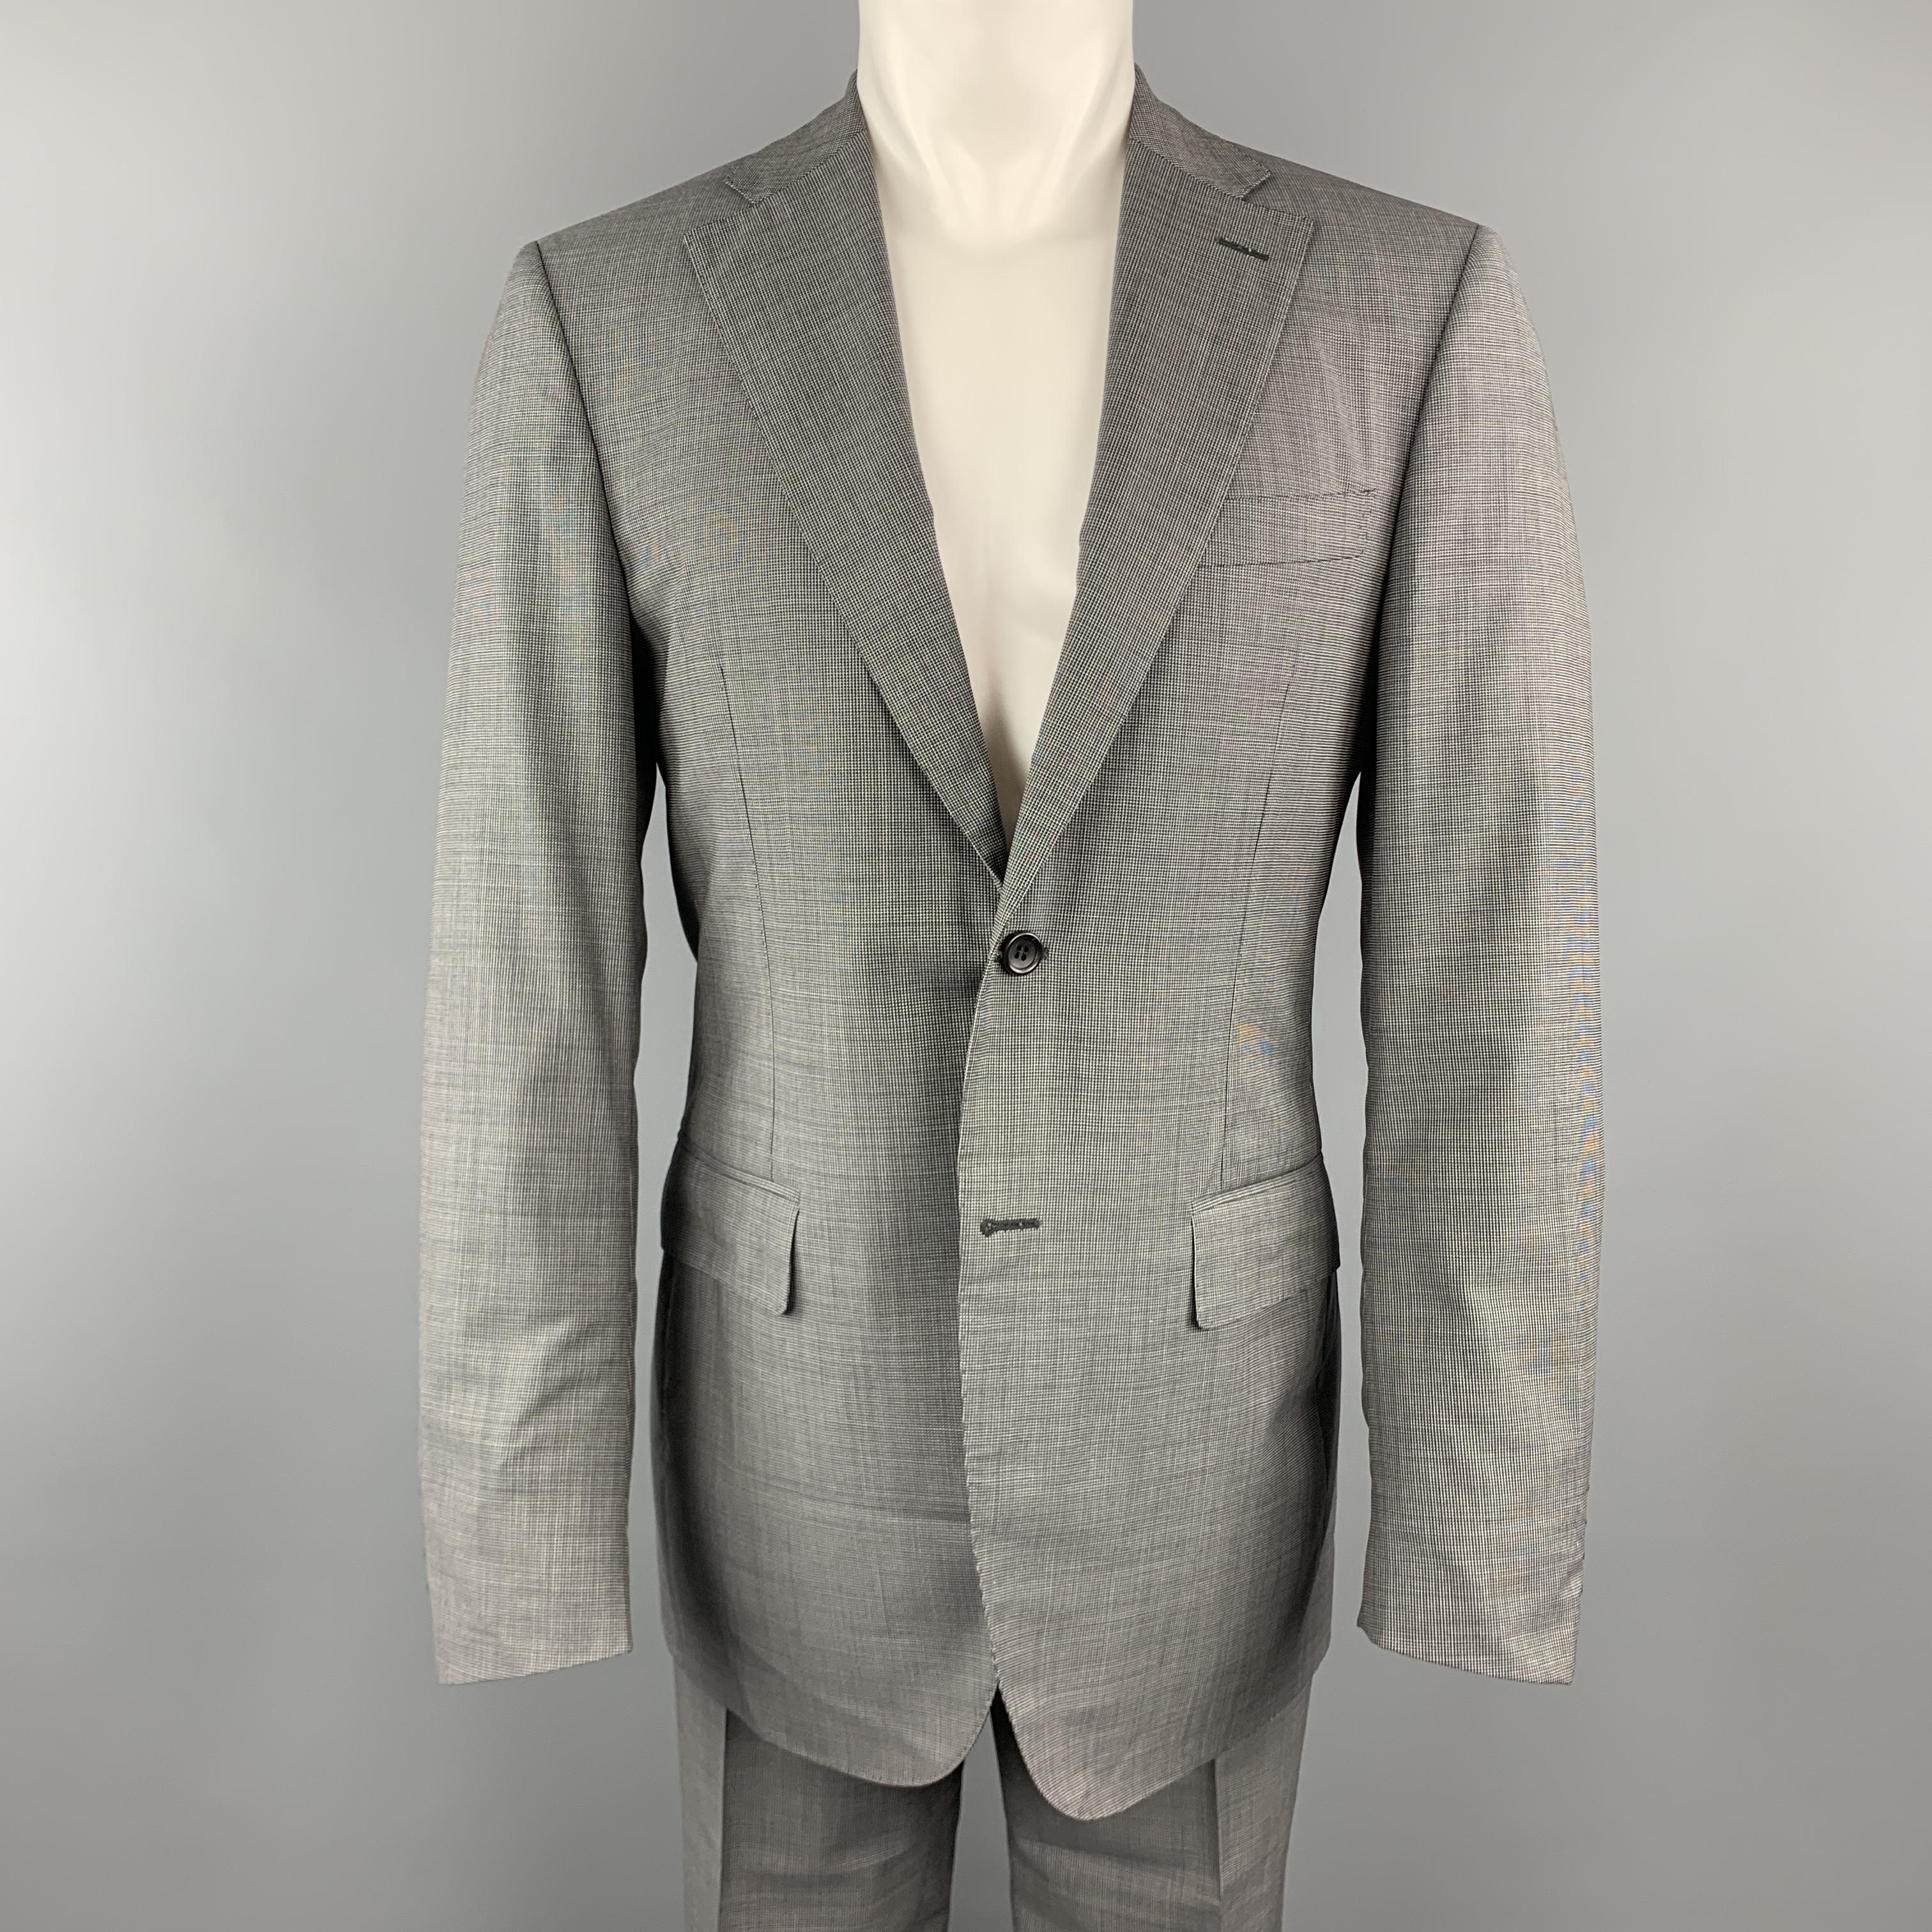 CANALI two piece suit comes in gray nailhead virgin wool and includes a notch lapel, single breasted sport coat and matching flat front trousers. Made in Italy.

Excellent Pre-Owned Condition.
Marked: IT 48

Measurements:

-Jacket
Shoulder: 17.5